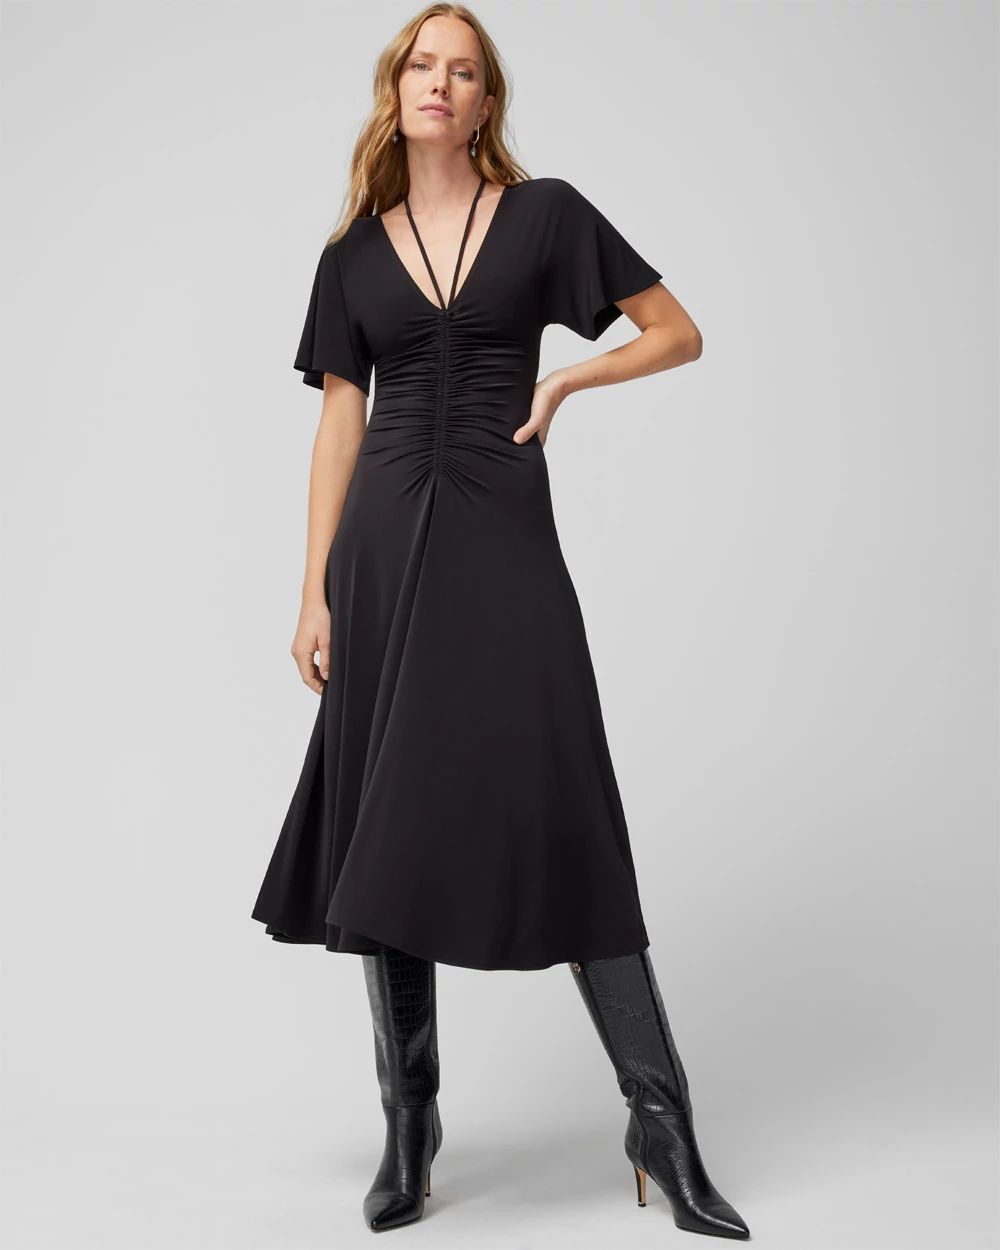 Short-Sleeve Ruched Front Midi Dress click to view larger image.